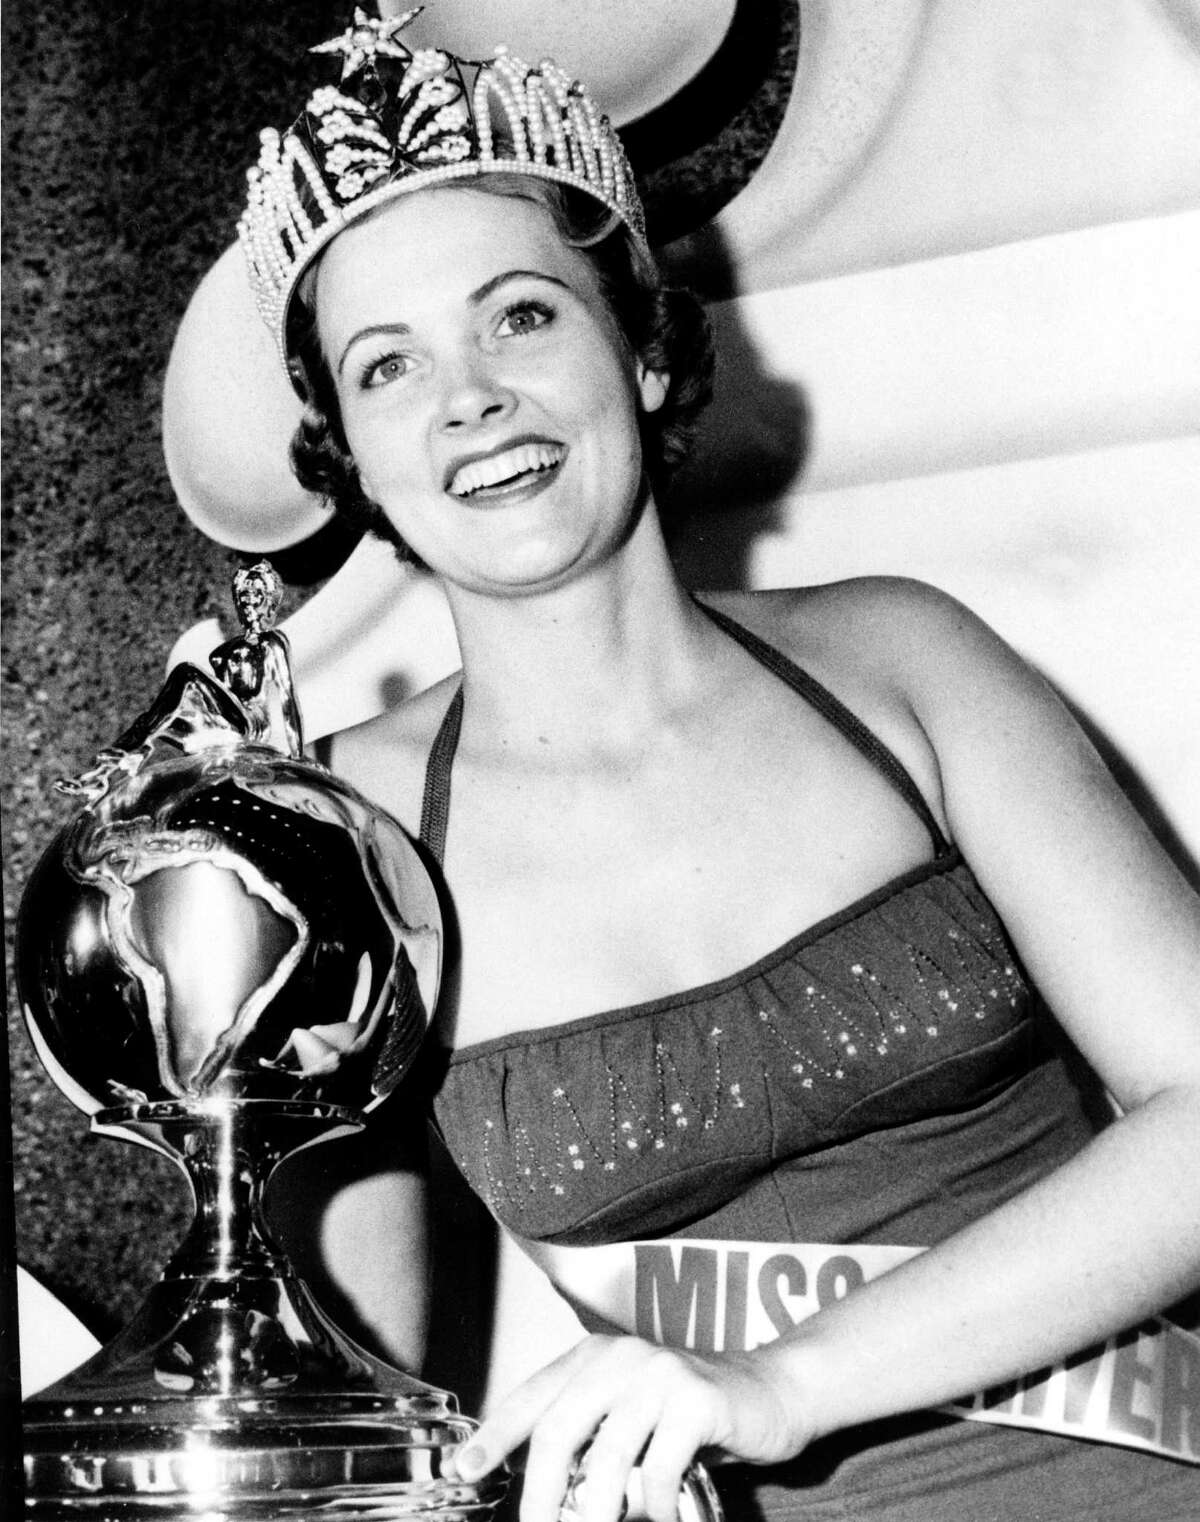 1954: Miriam Stevenson, Miss USA 1954, from South Carolina, was the first Miss USA to become Miss Universe.